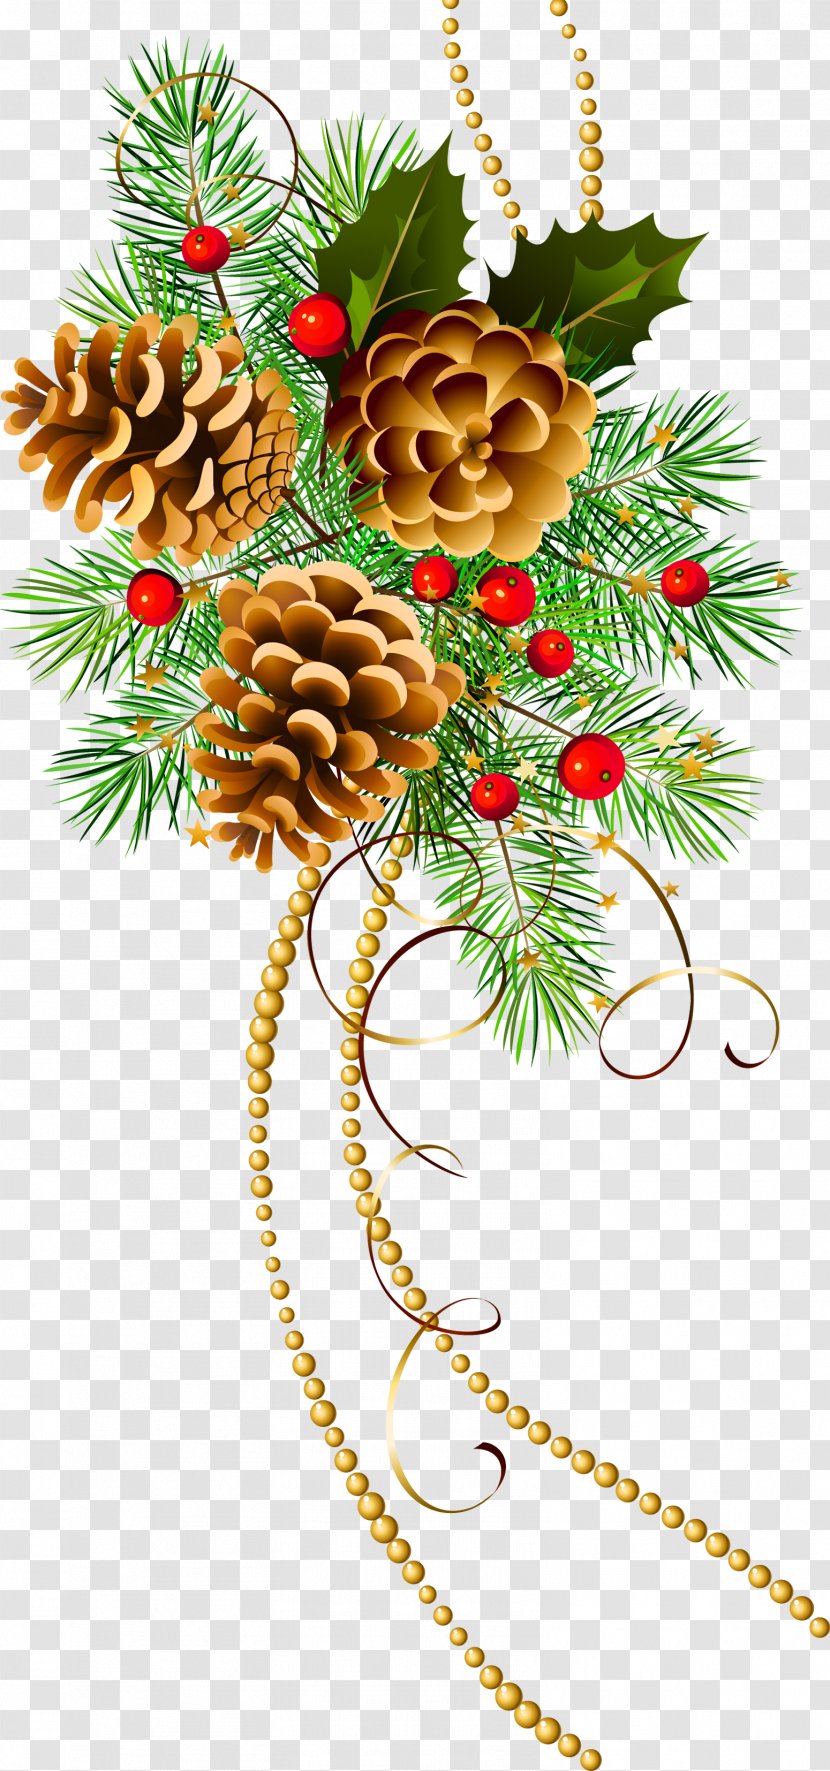 Christmas Decoration Ornament Tree Clip Art - Wreath - Three Cones With Pine Branch Clipart Transparent PNG